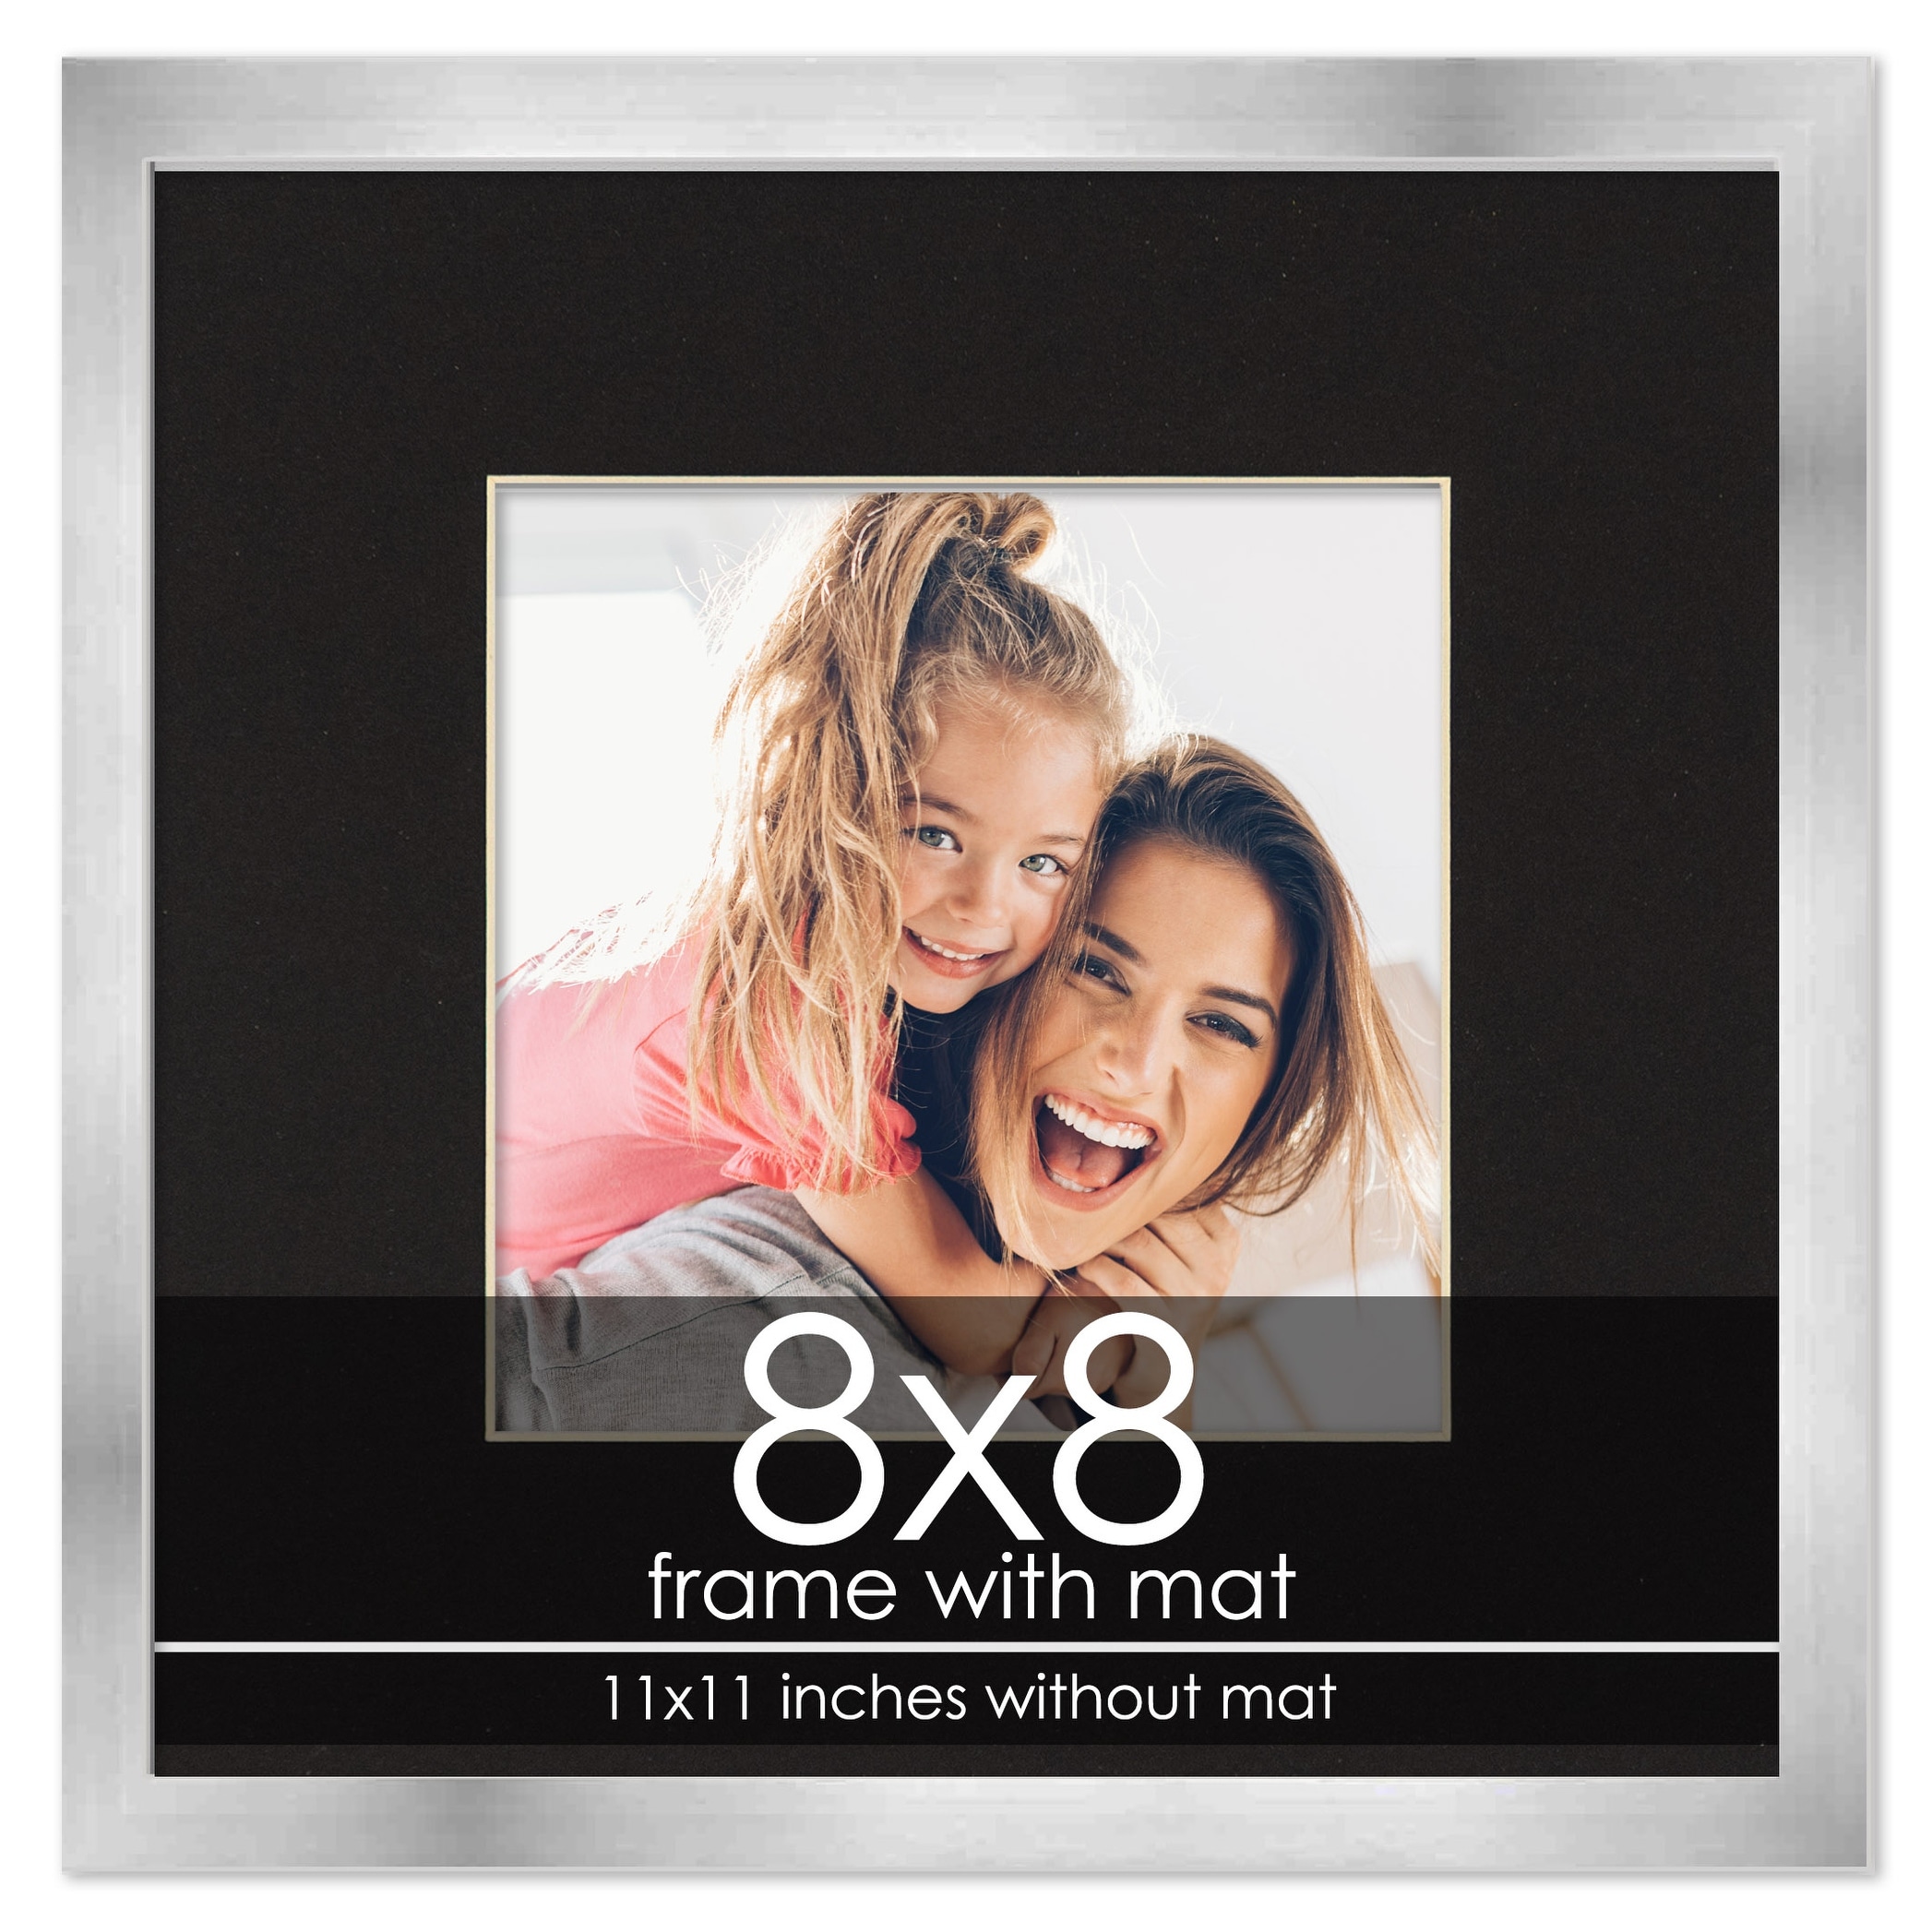 8x8 Frame with Mat - Silver 11x11 Frame Wood Made to Display Print or Poster Measuring 8 x 8 Inches with Black Photo Mat